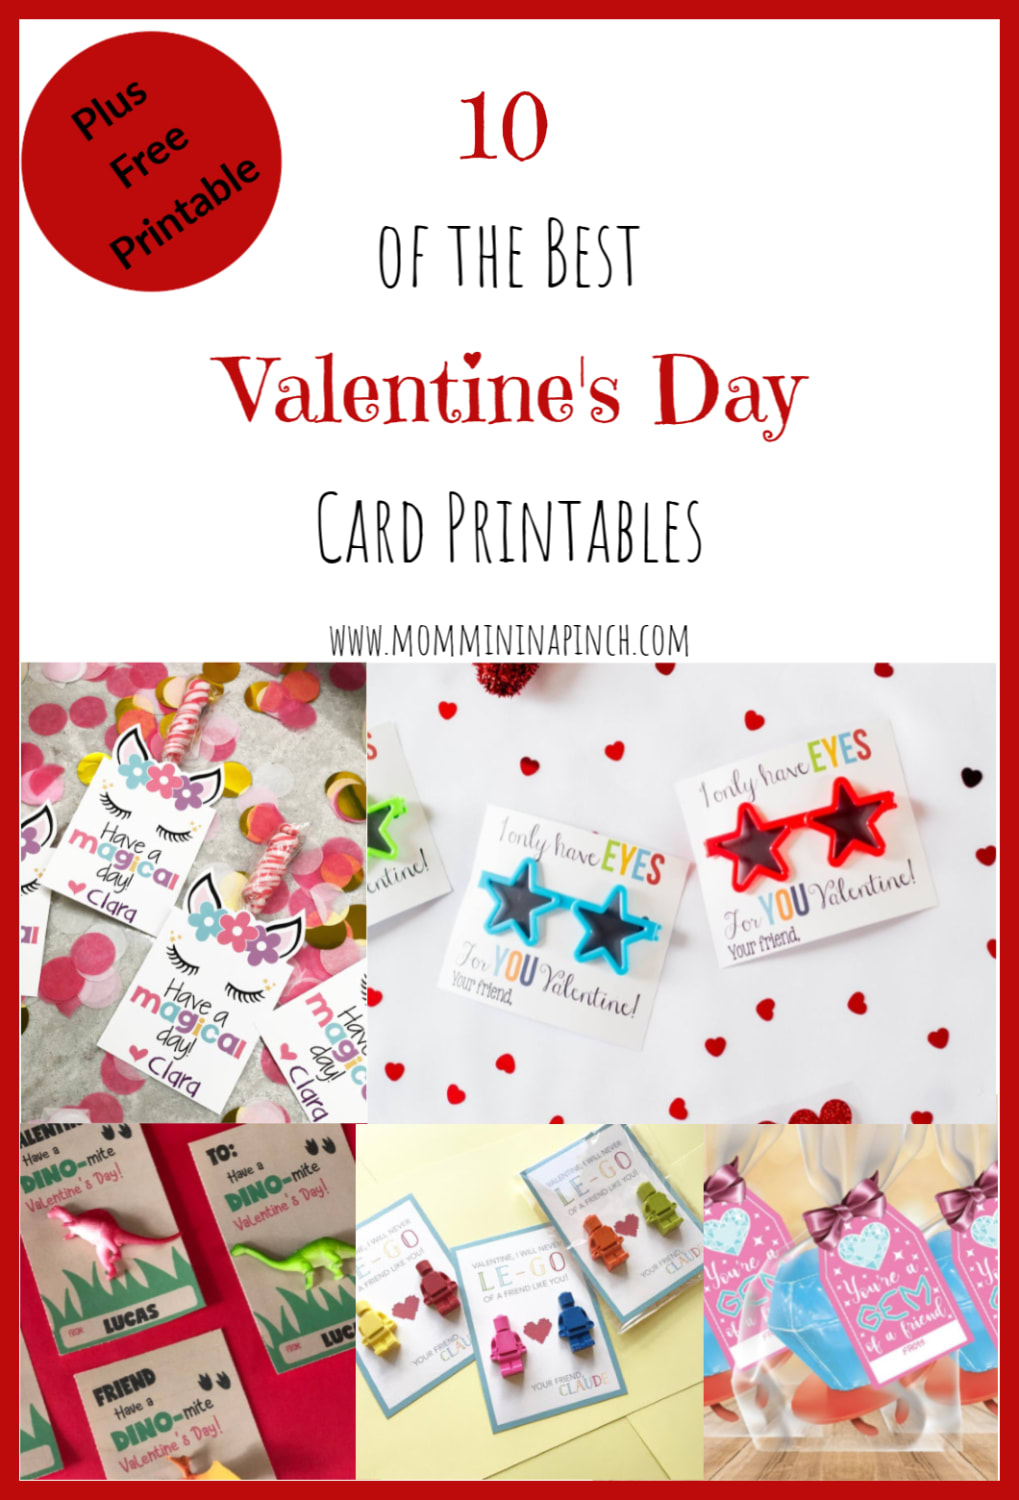 Valentines Day Card Printable's